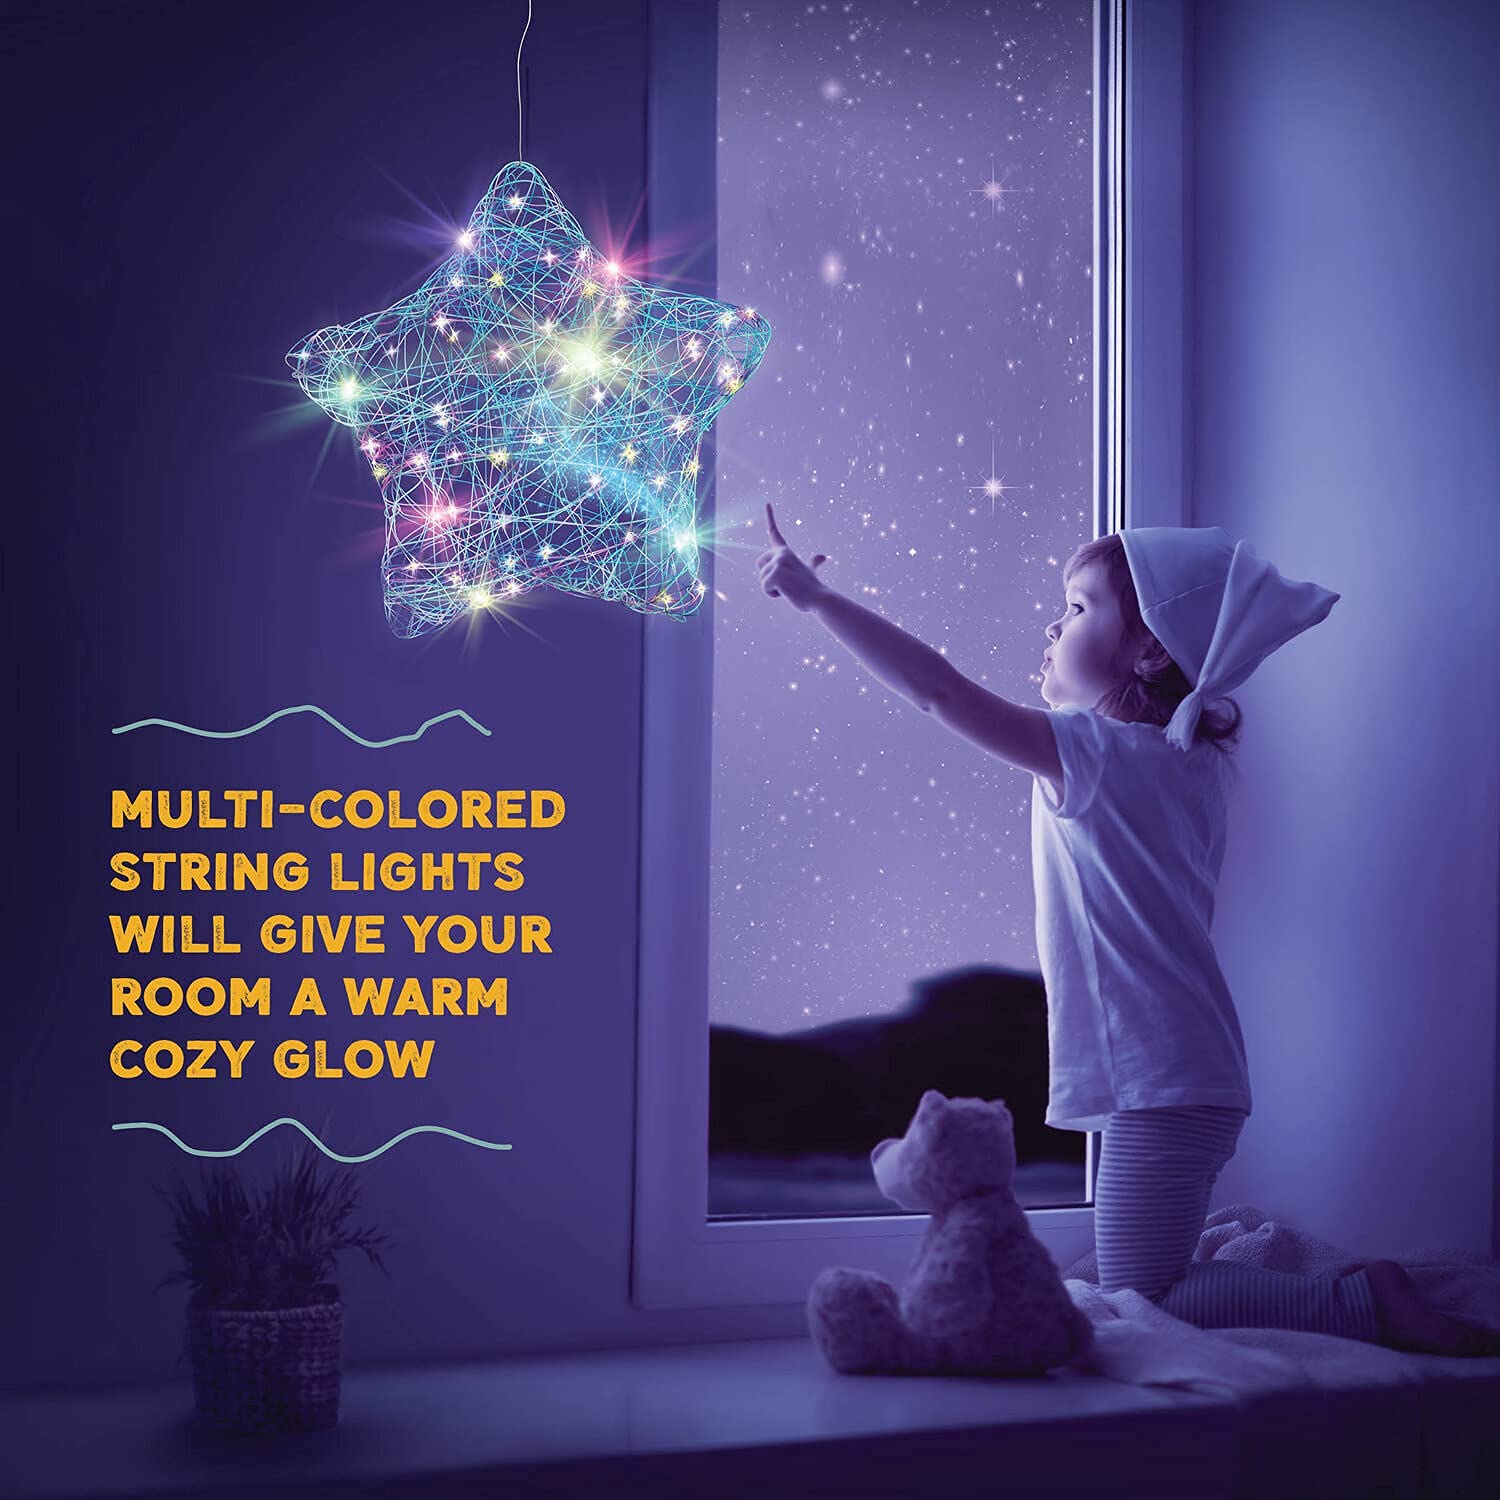 3D String Art Kit for Kids - Makes a Light-Up Star Lantern with 20 Multi-Colored LED Bulbs - Kids Gifts - Crafts for Girls and Boys Ages 8-12 - DIY Arts & Craft Kits for 8, 9, 10, 11, 12 Year Old Girl